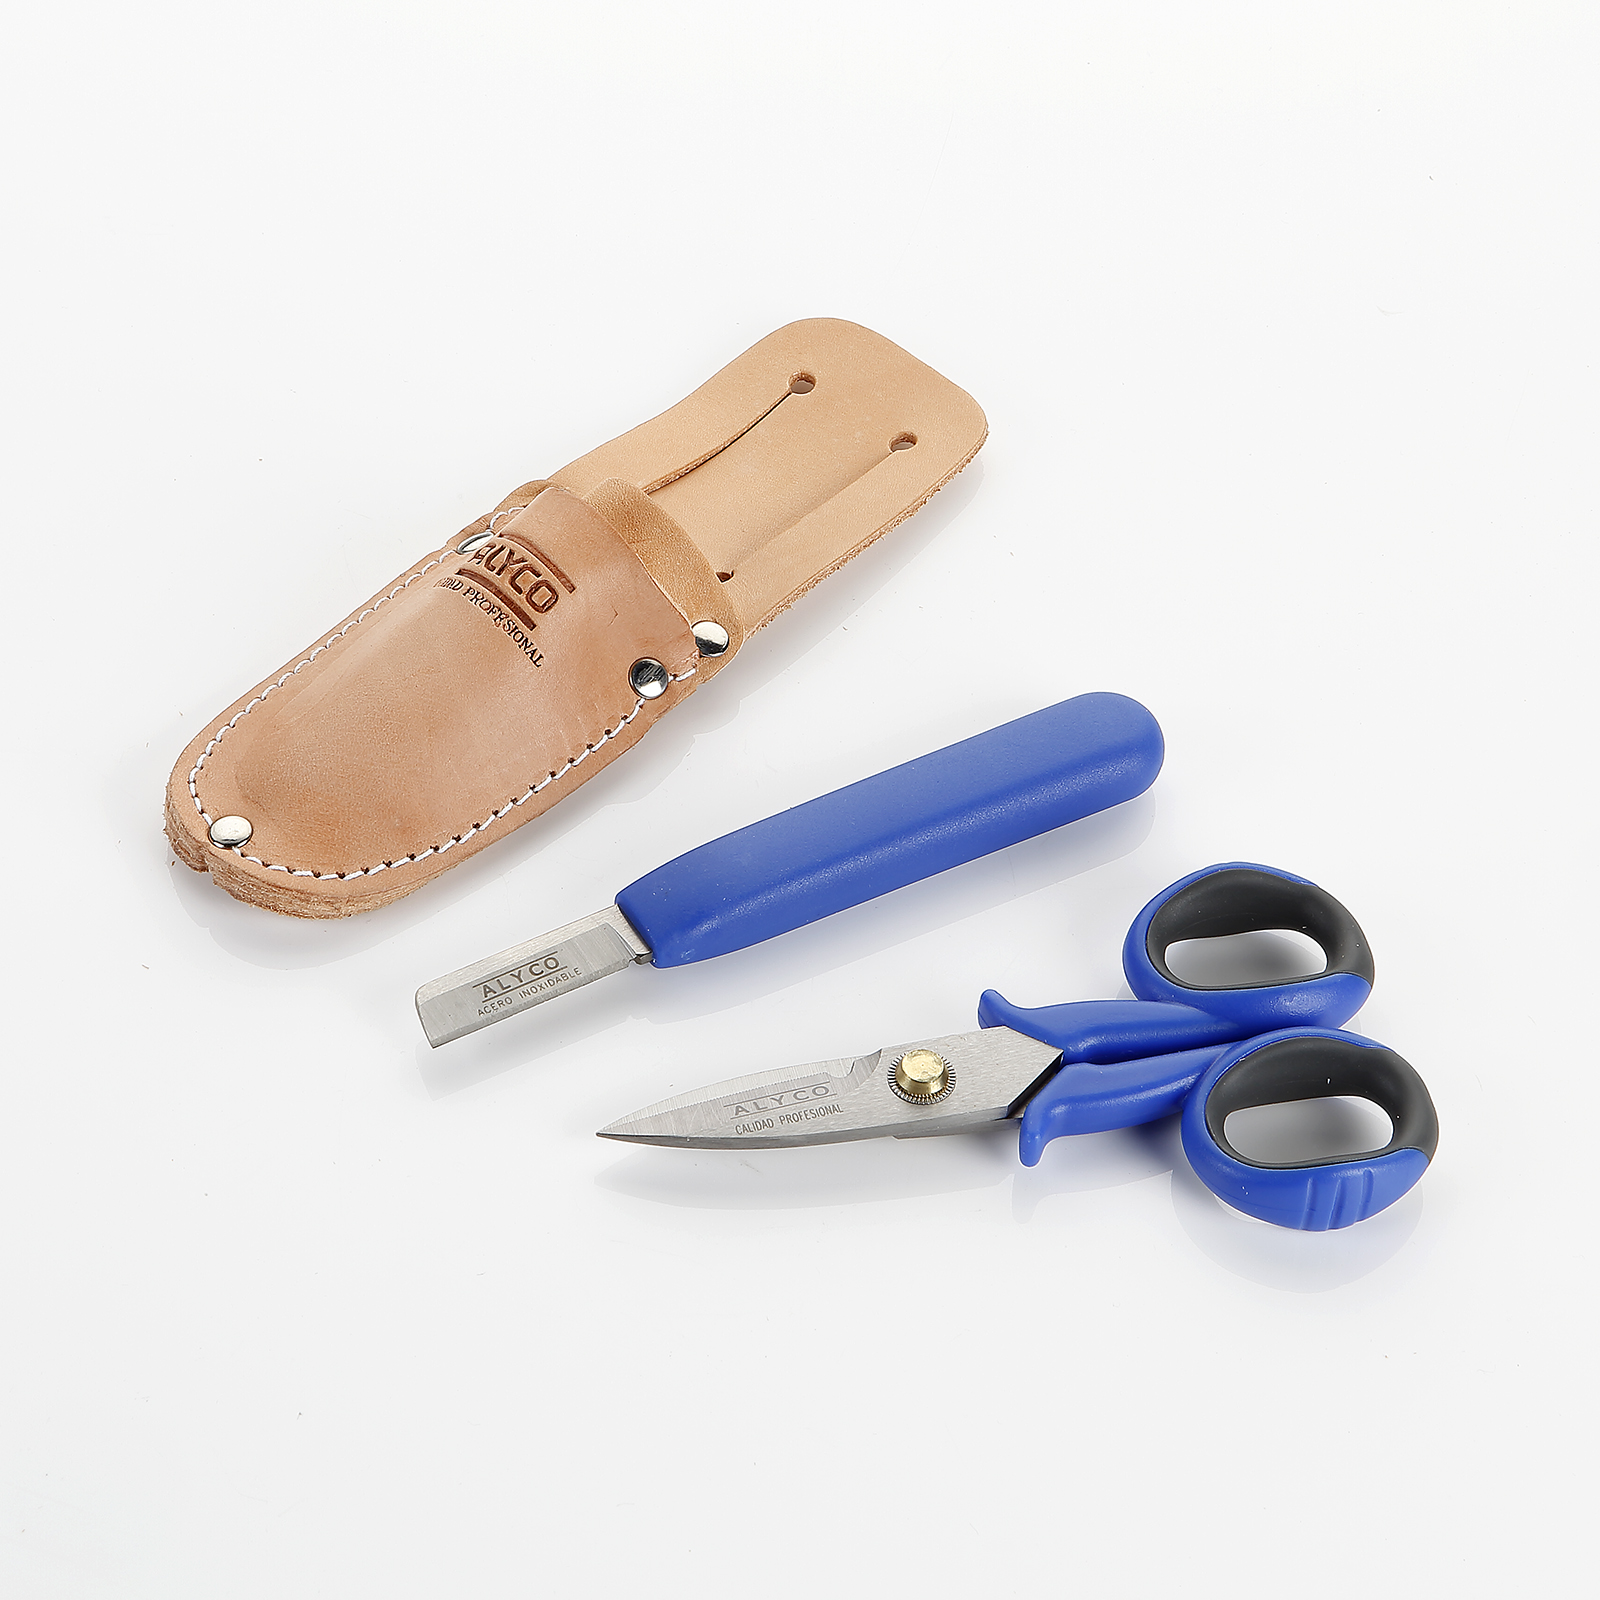 Cable Splicer Kit with Knife, Electrician's Scissors, and Leather